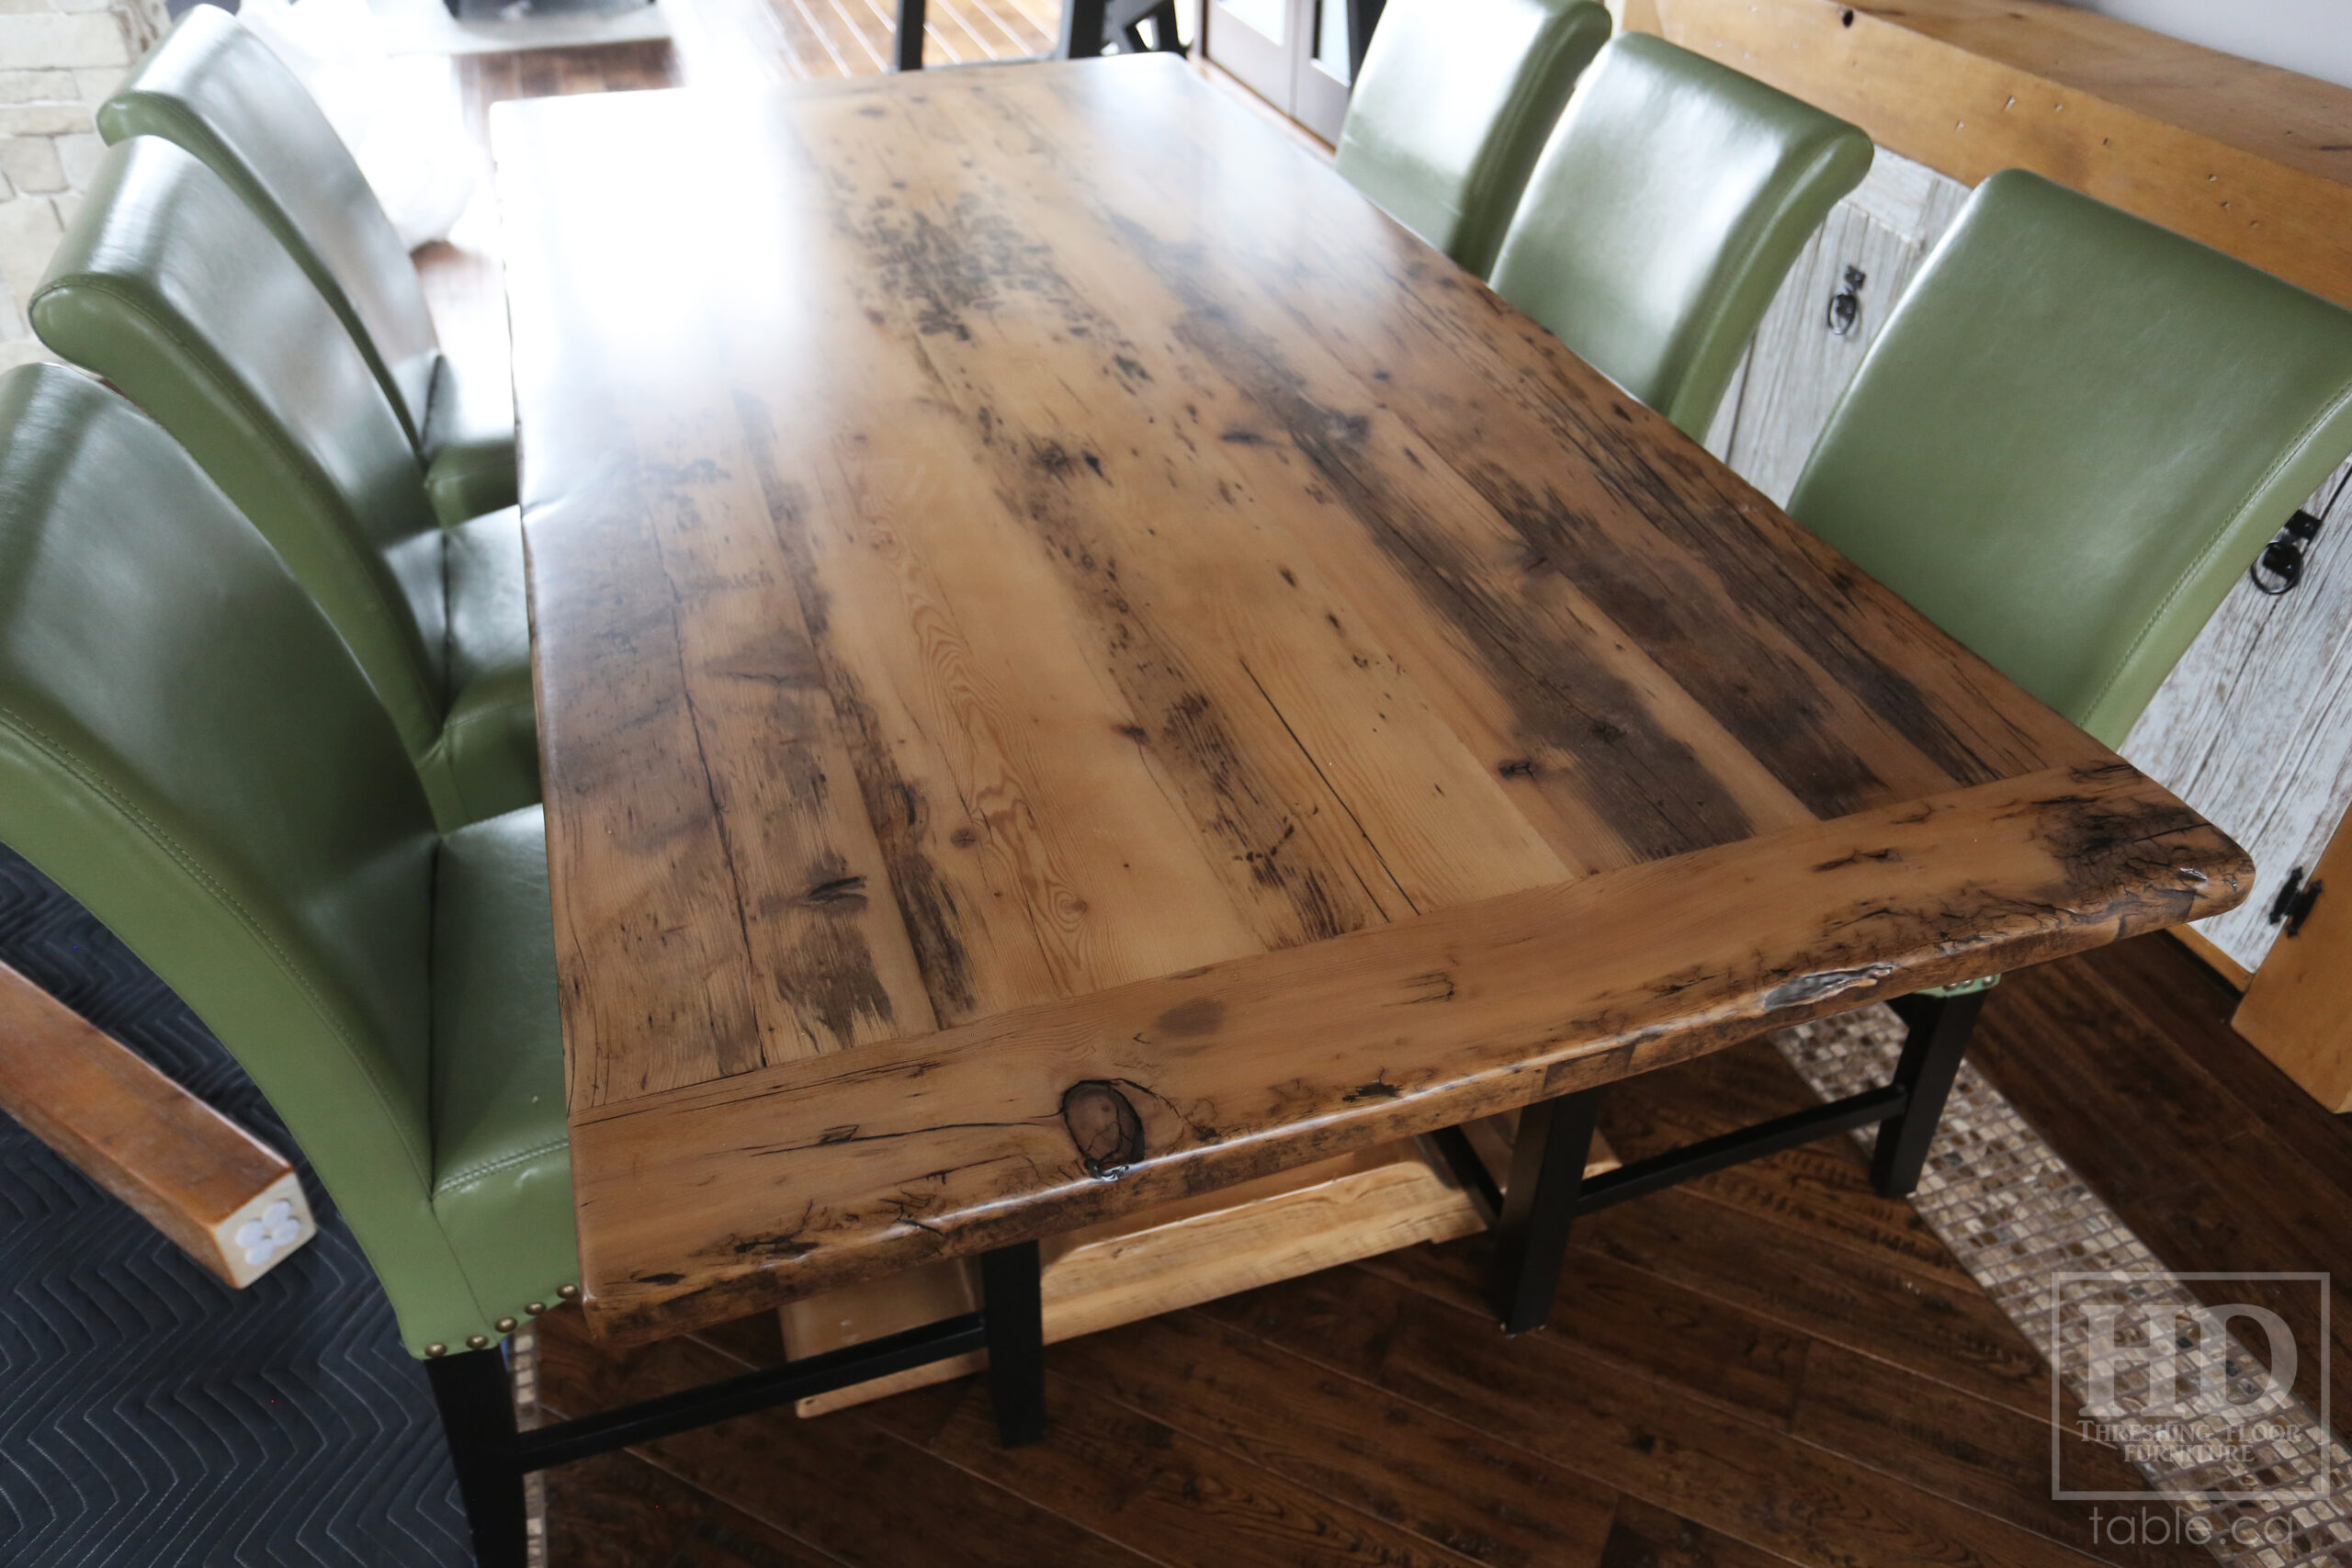 7' Ontario Barnwood Table we made for a Kitchener, Ontario home - 41" wide - Double Pedestal with Rail + Wide Feet Option - Old Growth Hemlock Threshing Floor Construction - Original edges & distressing maintained - Greytone Option - Premium epoxy + matte polyurethane finish - www.table.ca